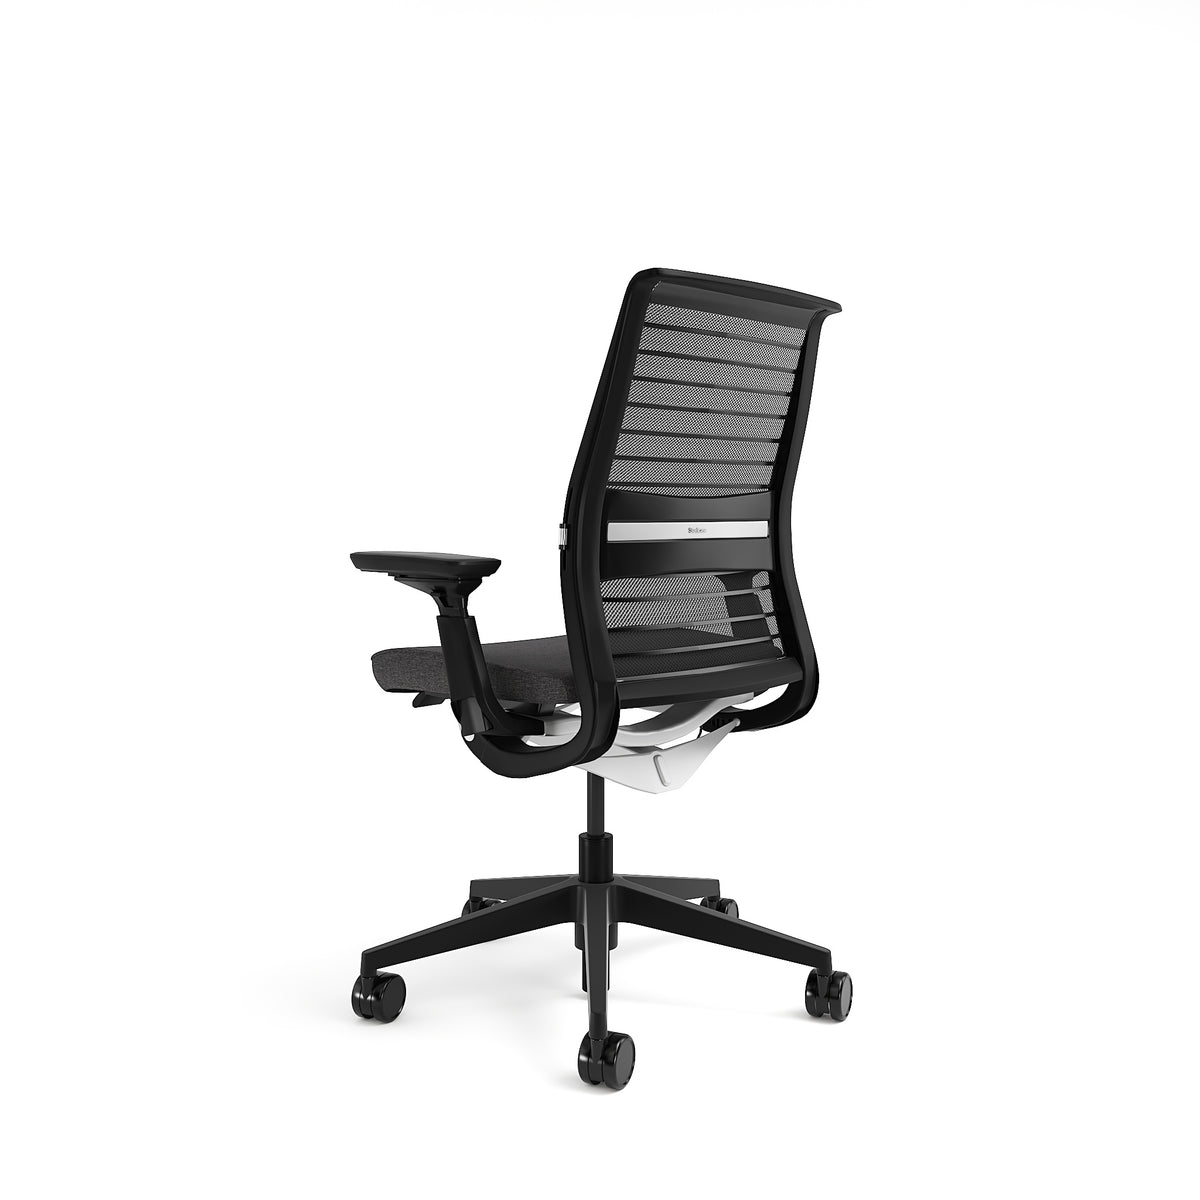 Creatice Steelcase Office Chairs India for Large Space